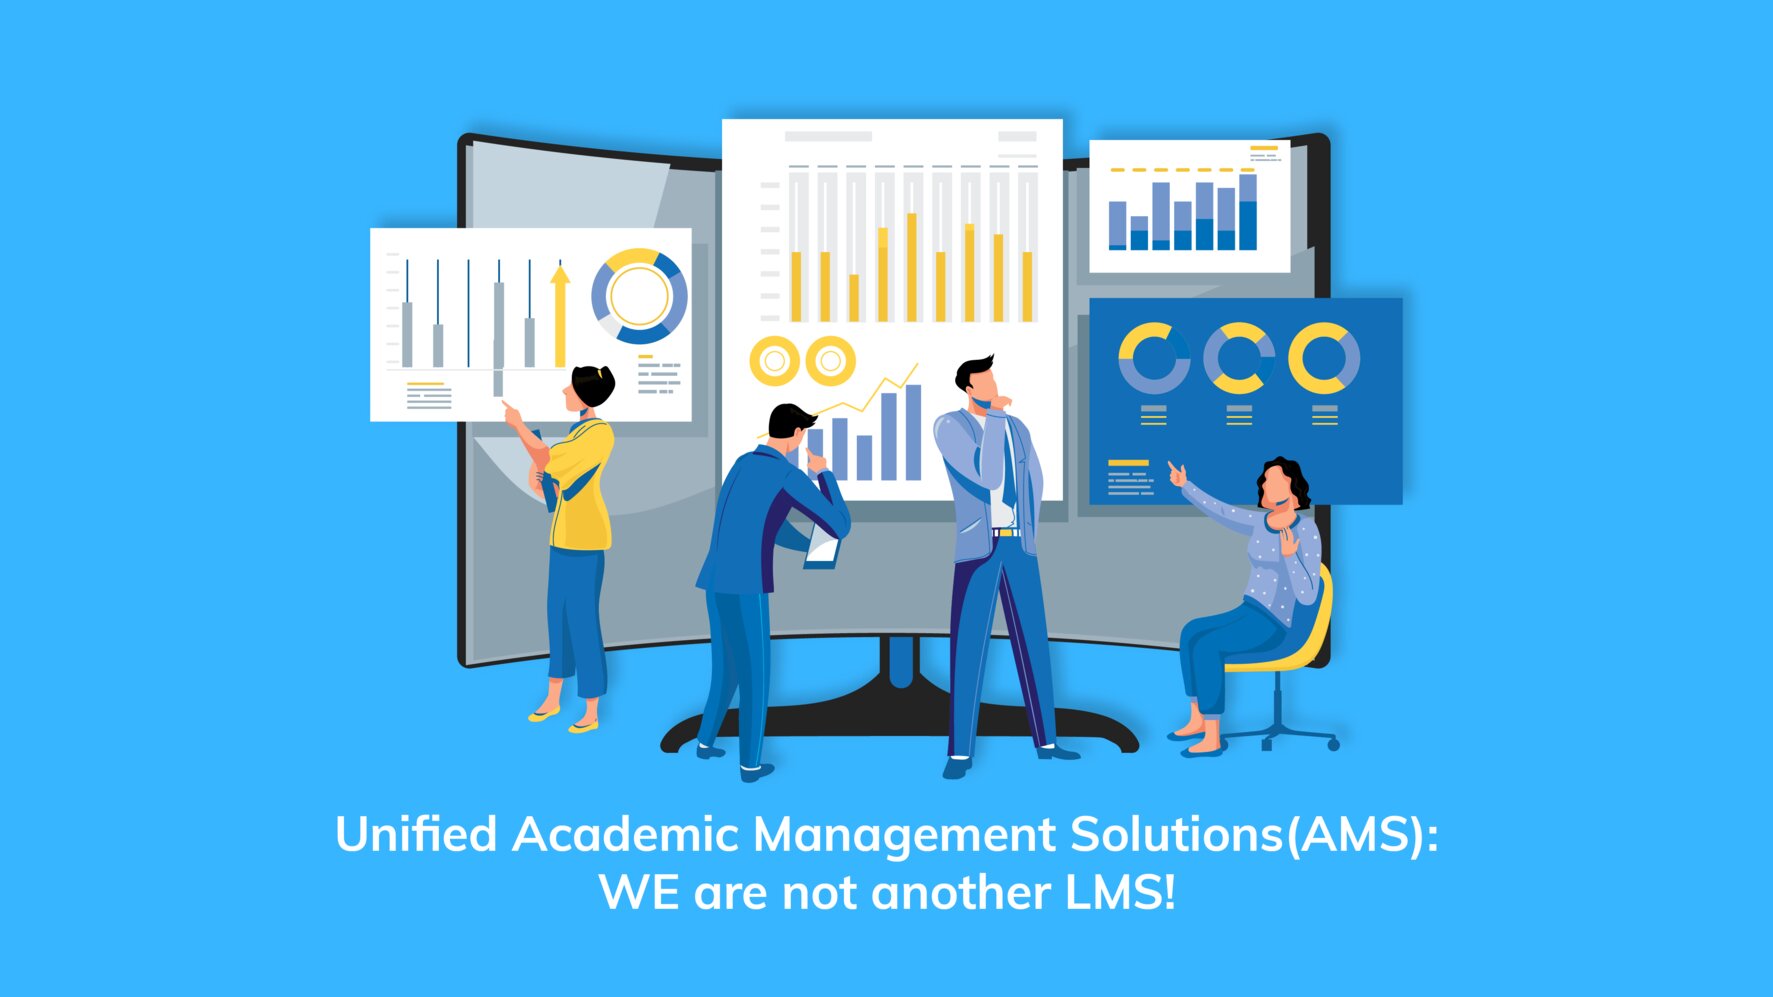 Digital Assessment Solutions, Digital Classroom Solutions, Digital eLearning Solution, Digital Learning Solution, Digital Scheduling Solution, Digital Scheduling System, Modern Education School,Higher Education eLearning, Learning Management Solutions, Online Assessment Platform ,Unified Academic Management Solutions(AMS): WE are not another LMS!